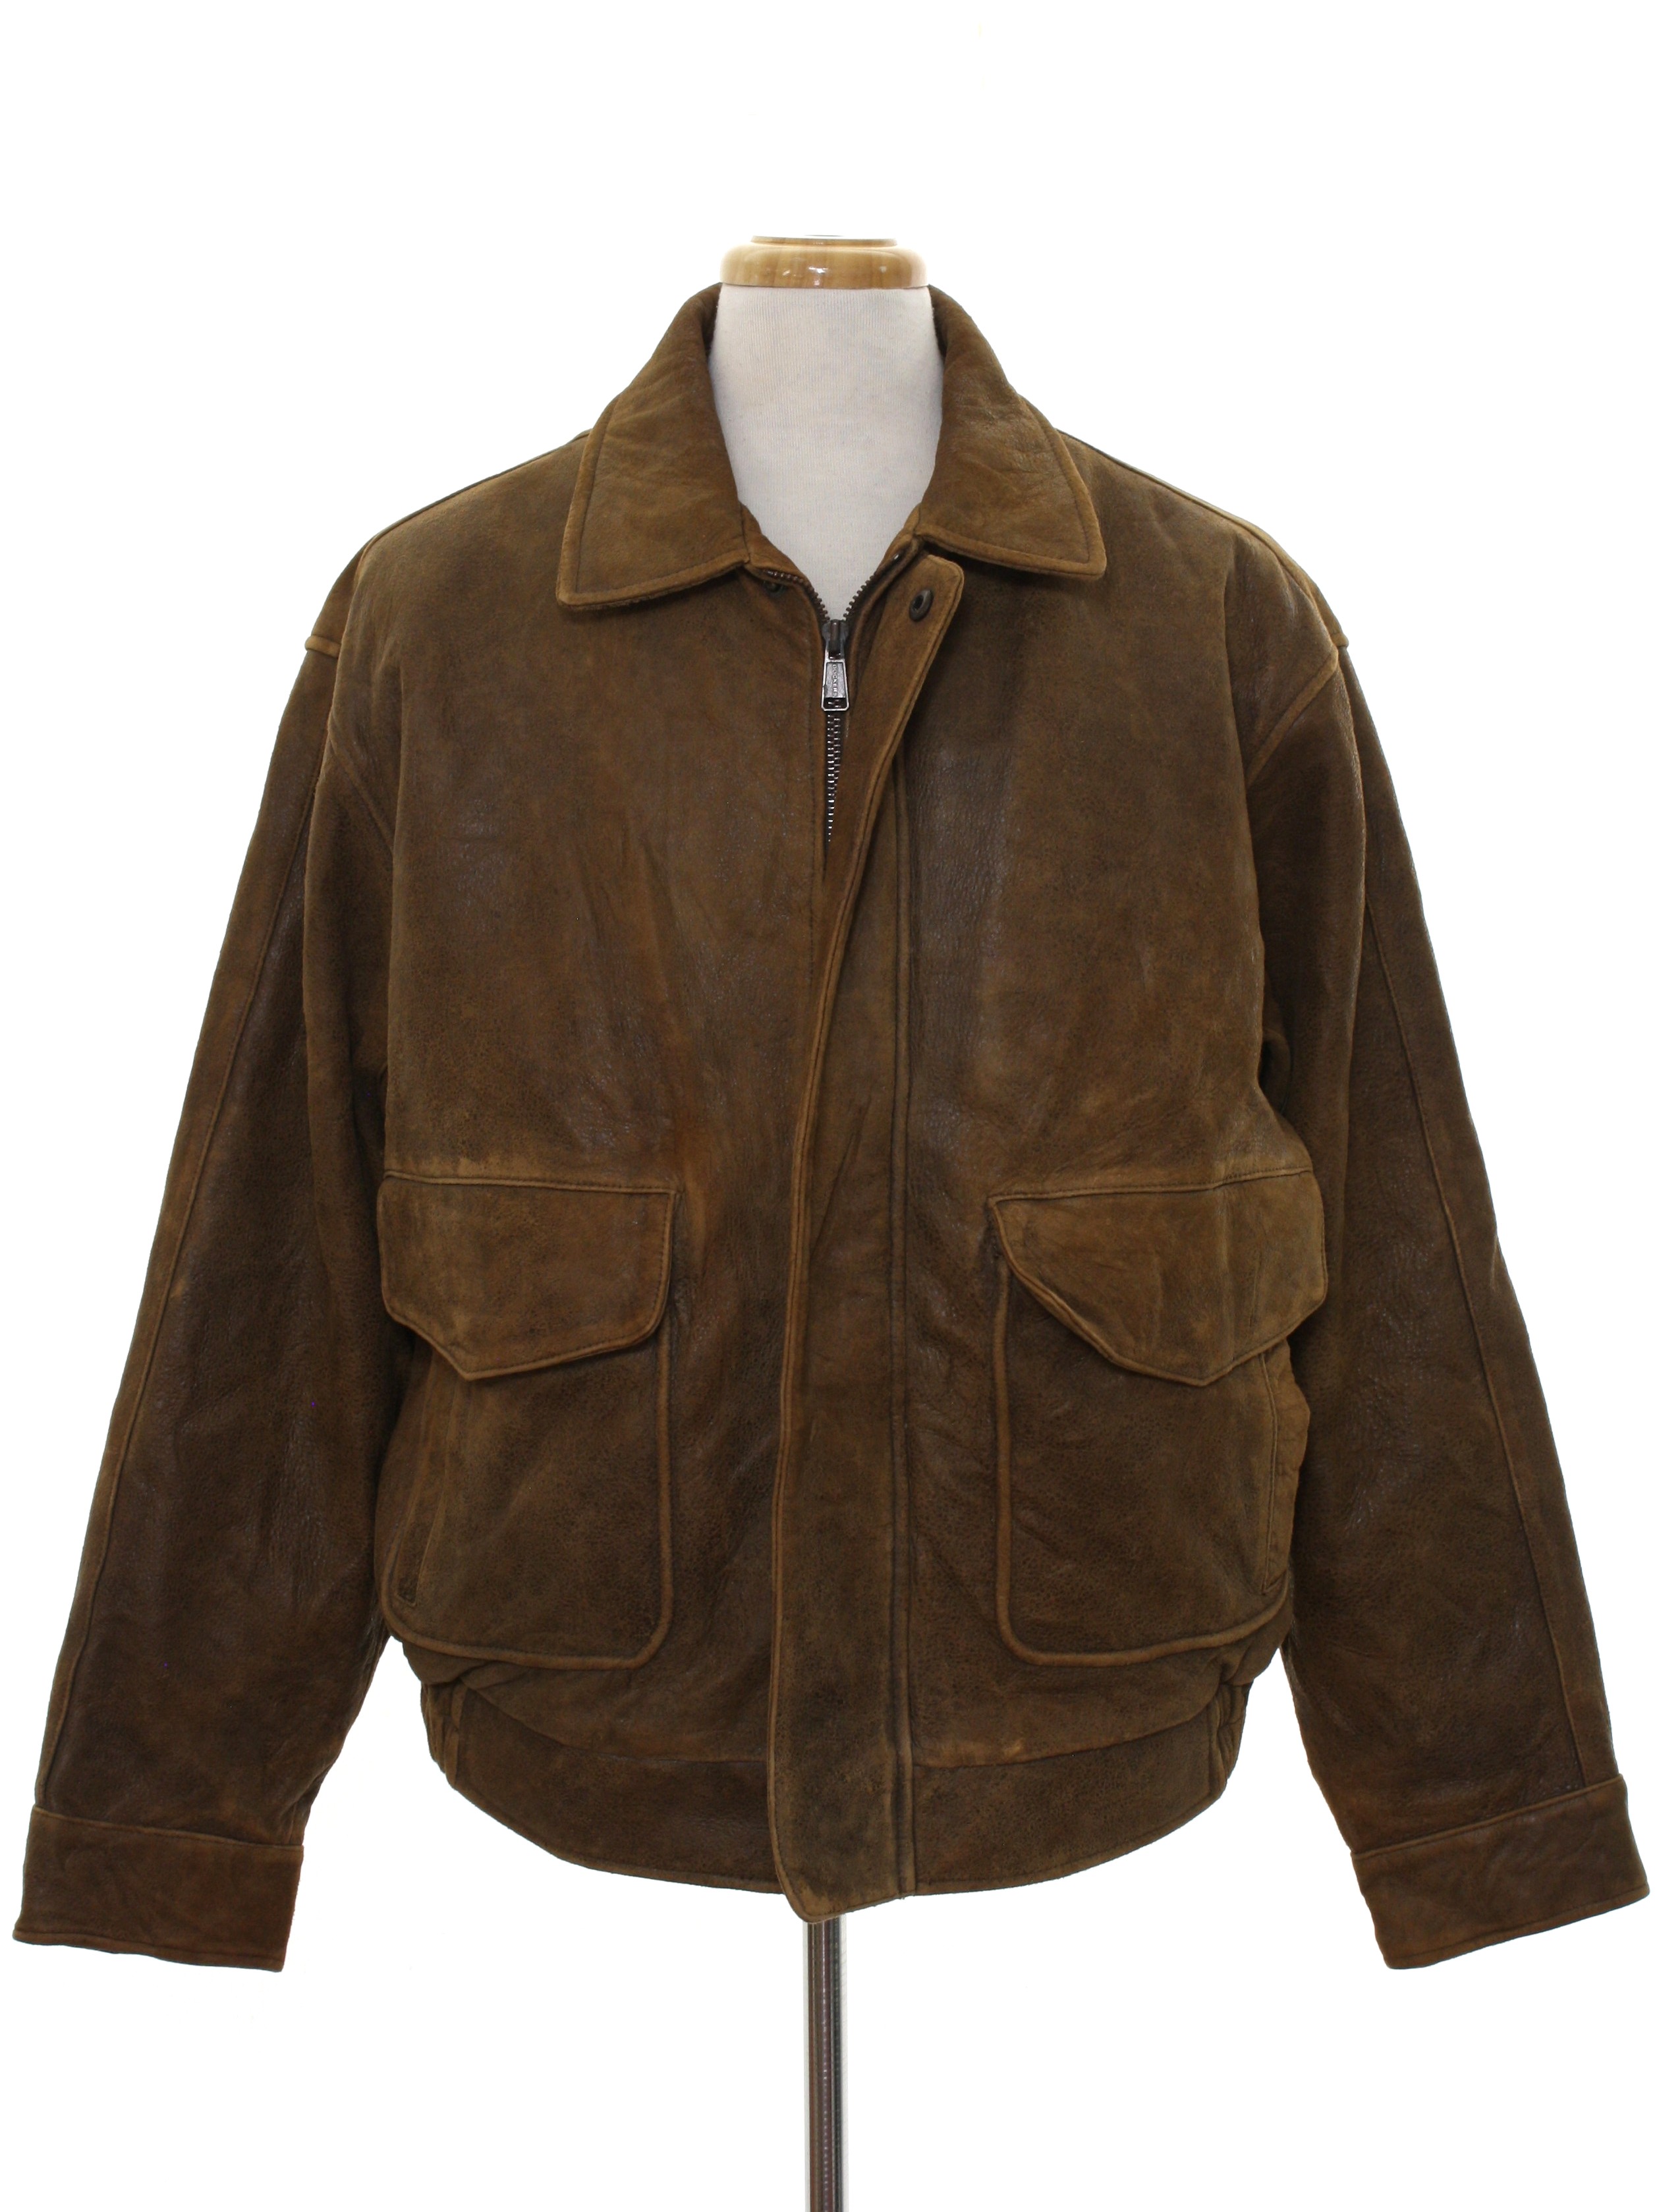 90s Retro Leather Jacket: 90s -Dockers- Mens brown background suede ...